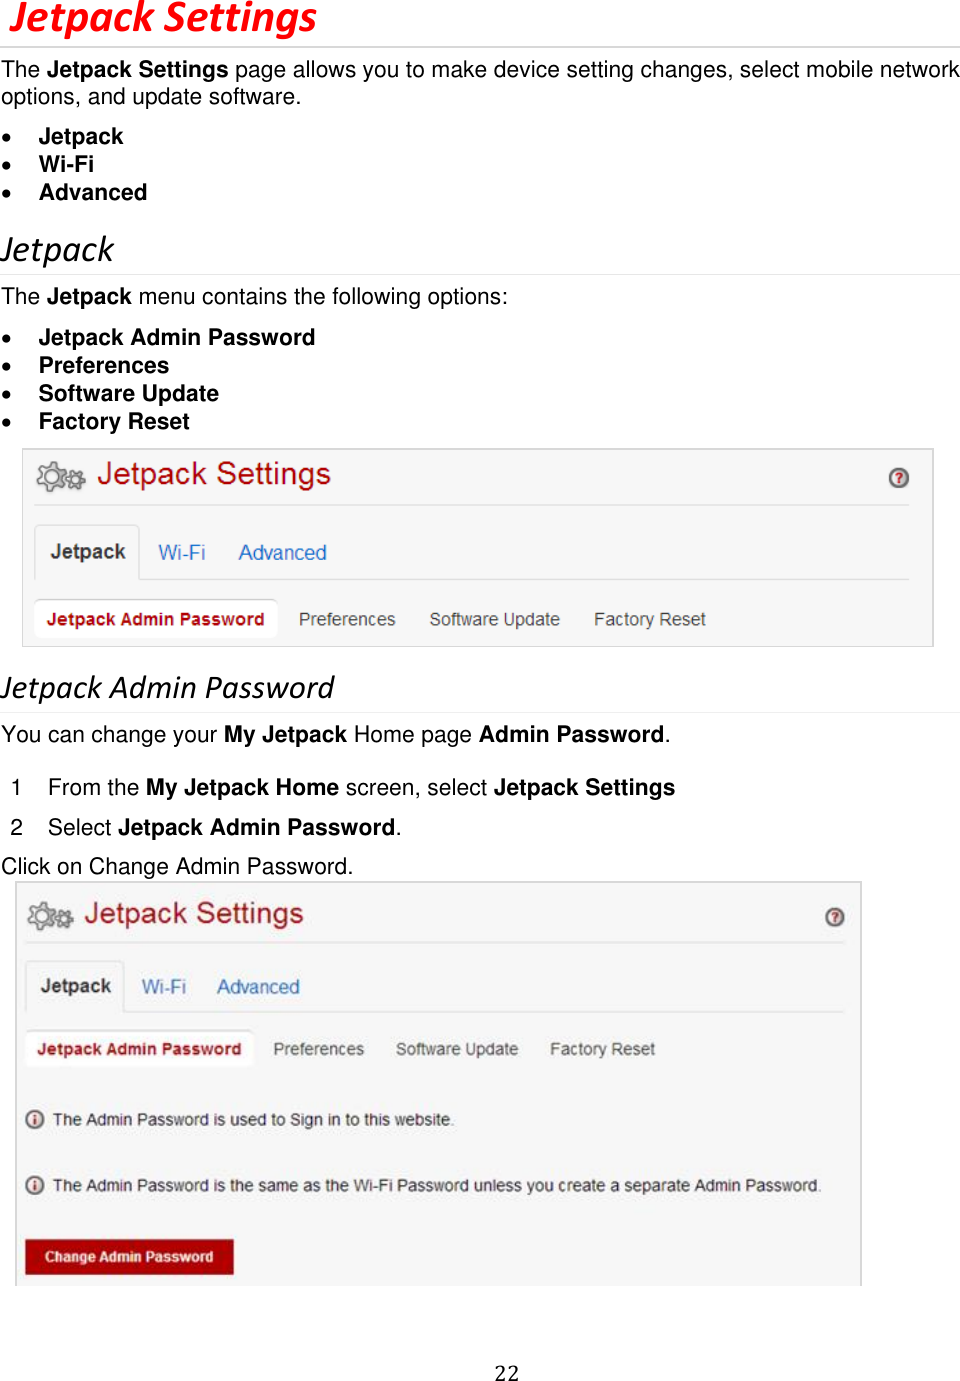   22   Jetpack Settings The Jetpack Settings page allows you to make device setting changes, select mobile network options, and update software.  Jetpack  Wi-Fi  Advanced Jetpack The Jetpack menu contains the following options:  Jetpack Admin Password   Preferences  Software Update  Factory Reset      Jetpack Admin Password You can change your My Jetpack Home page Admin Password.   1  From the My Jetpack Home screen, select Jetpack Settings 2  Select Jetpack Admin Password. Click on Change Admin Password.           